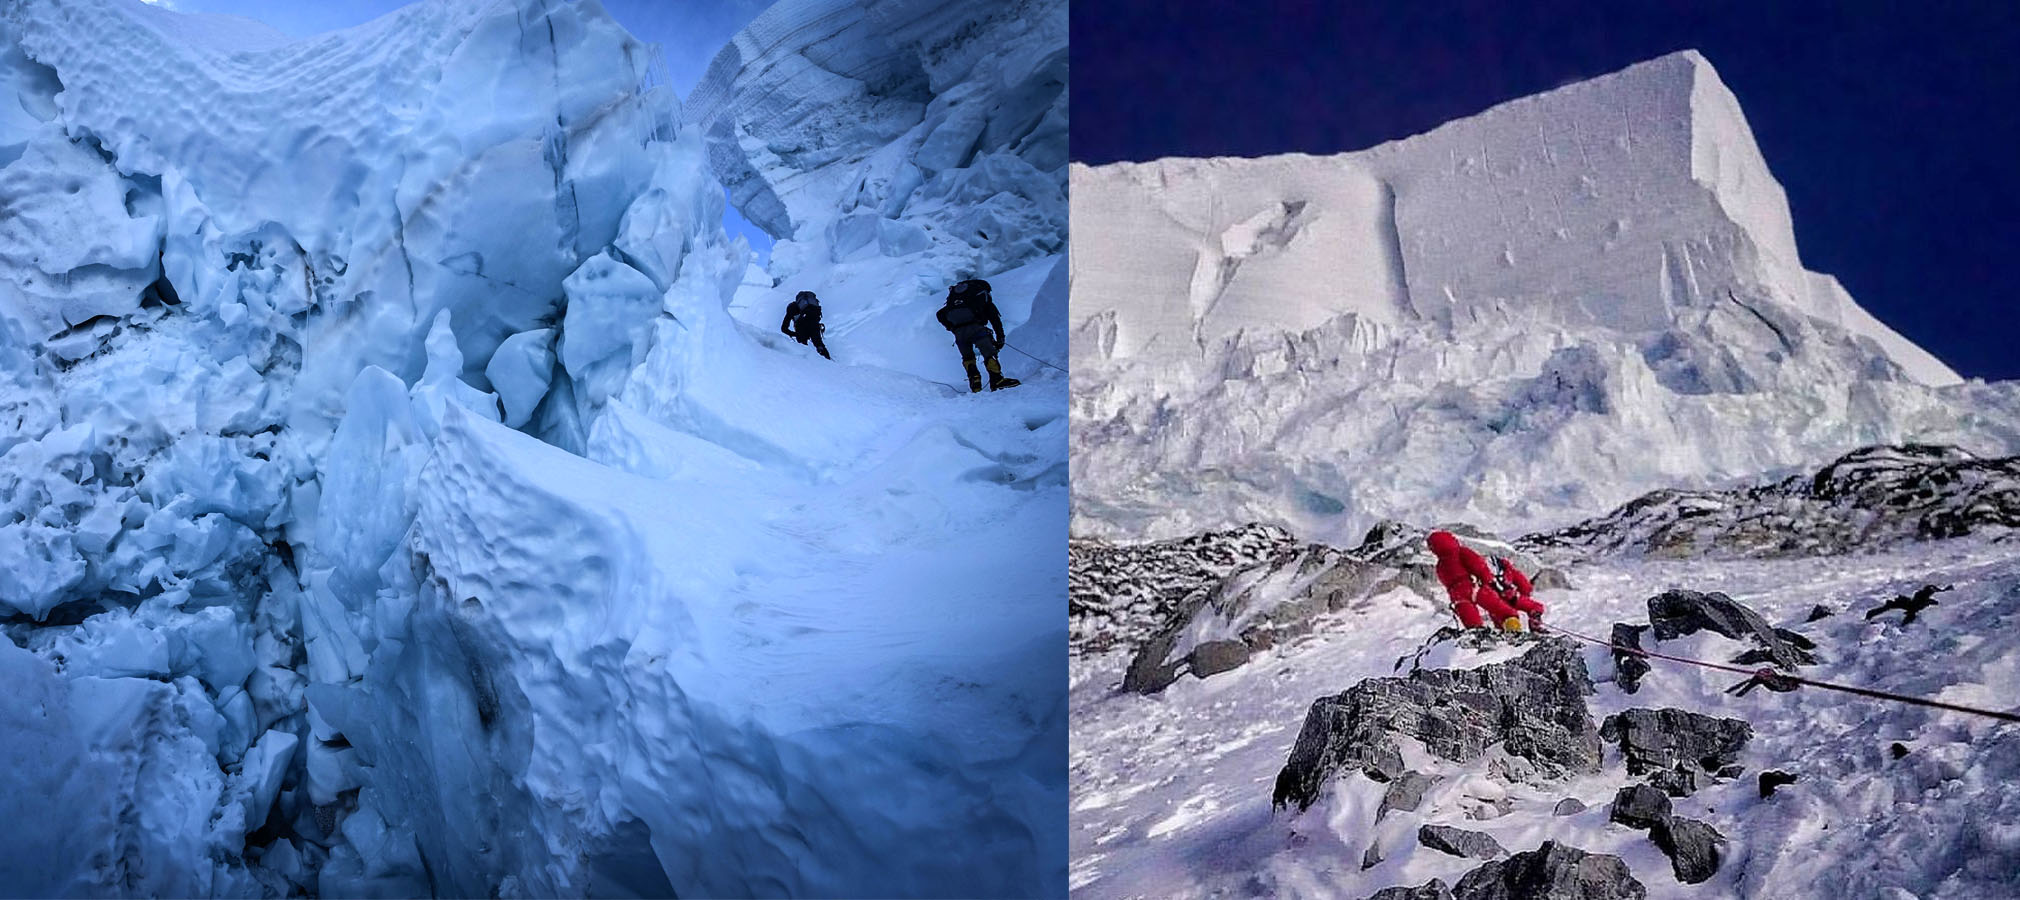 Comparing the Difficulty and Danger of the Khumbu Glacier on Mount Everest  and the Bottleneck of K2.